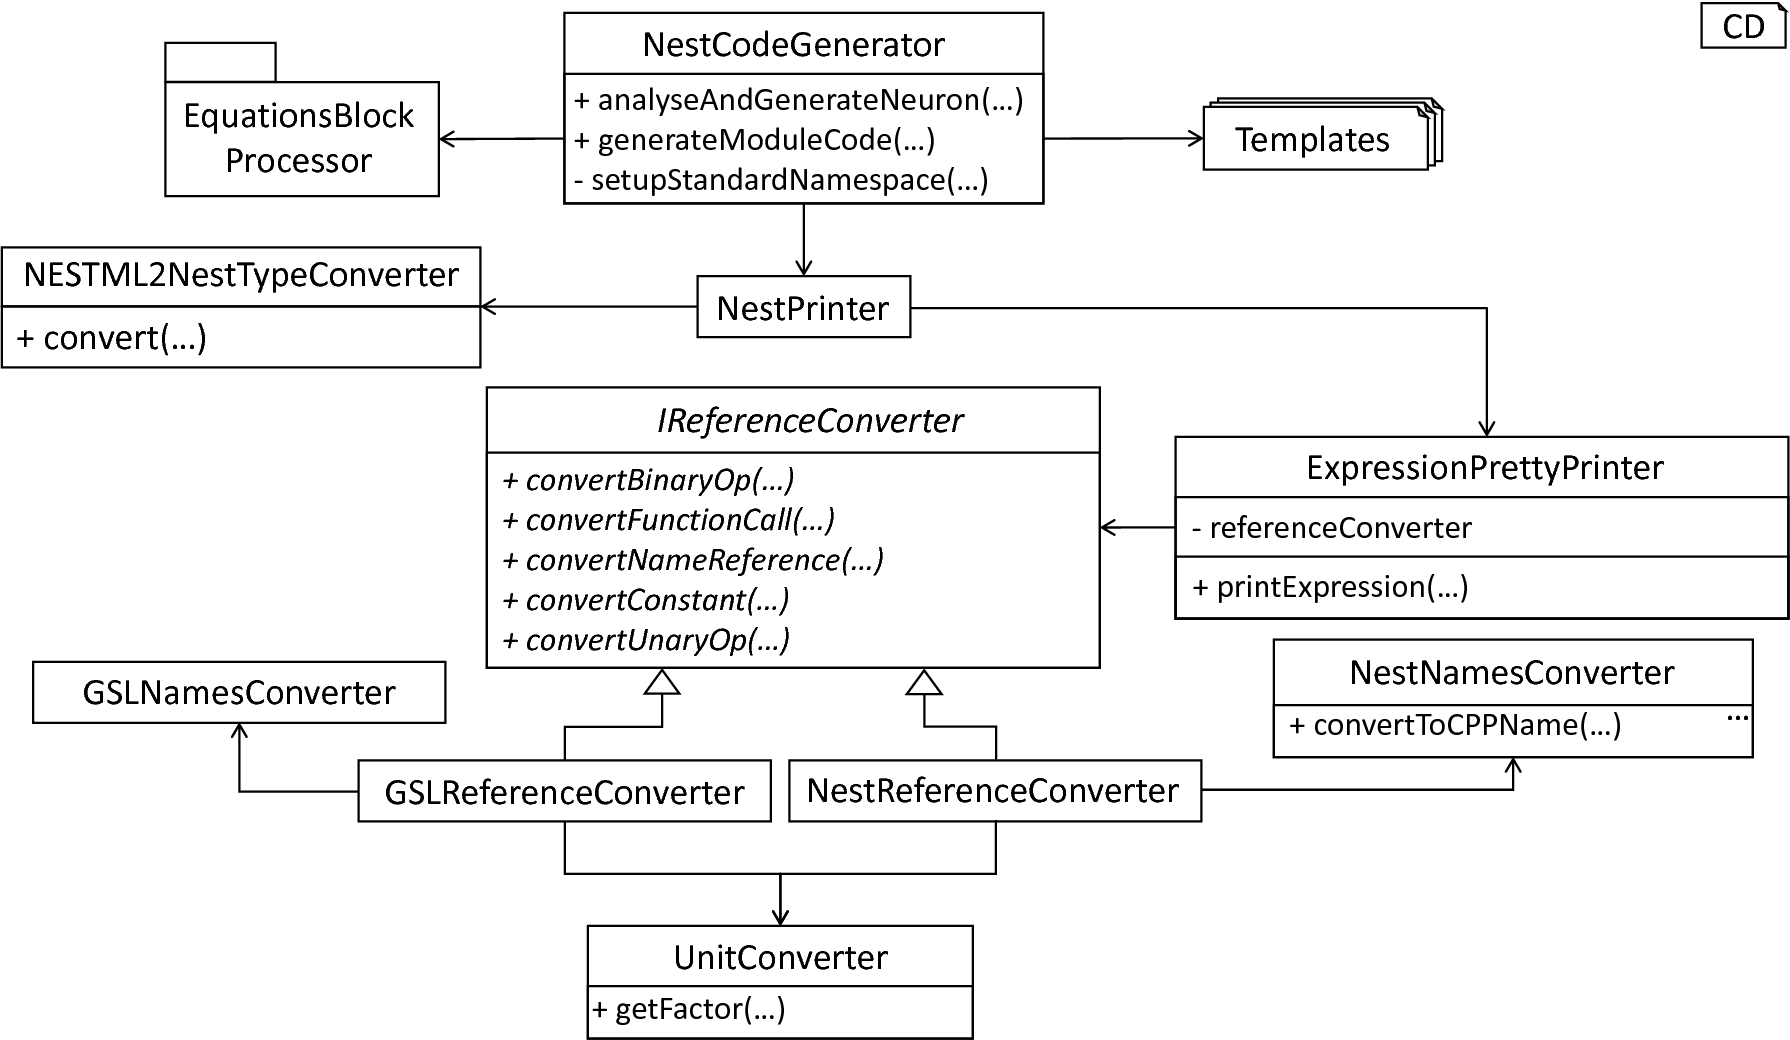 Overview of the NEST code generator.